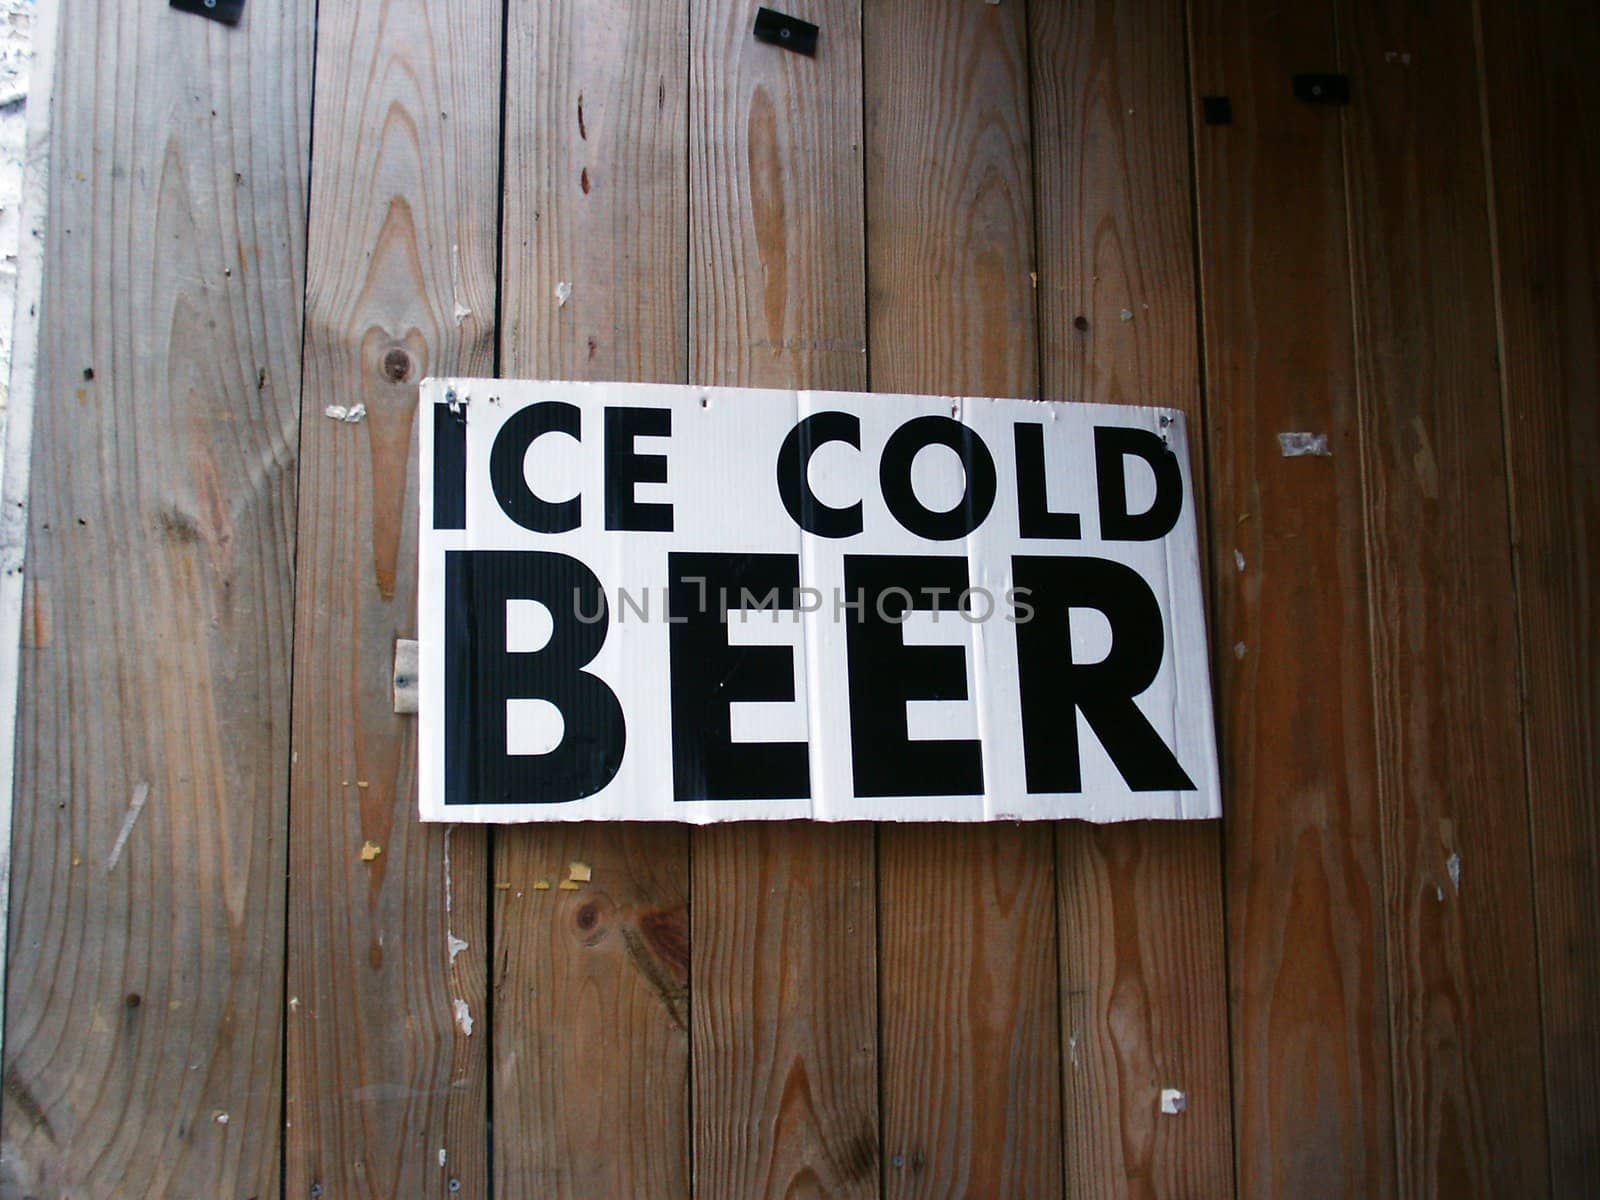 An "Ice Cold Beer" sign hanging on a wooden wall.